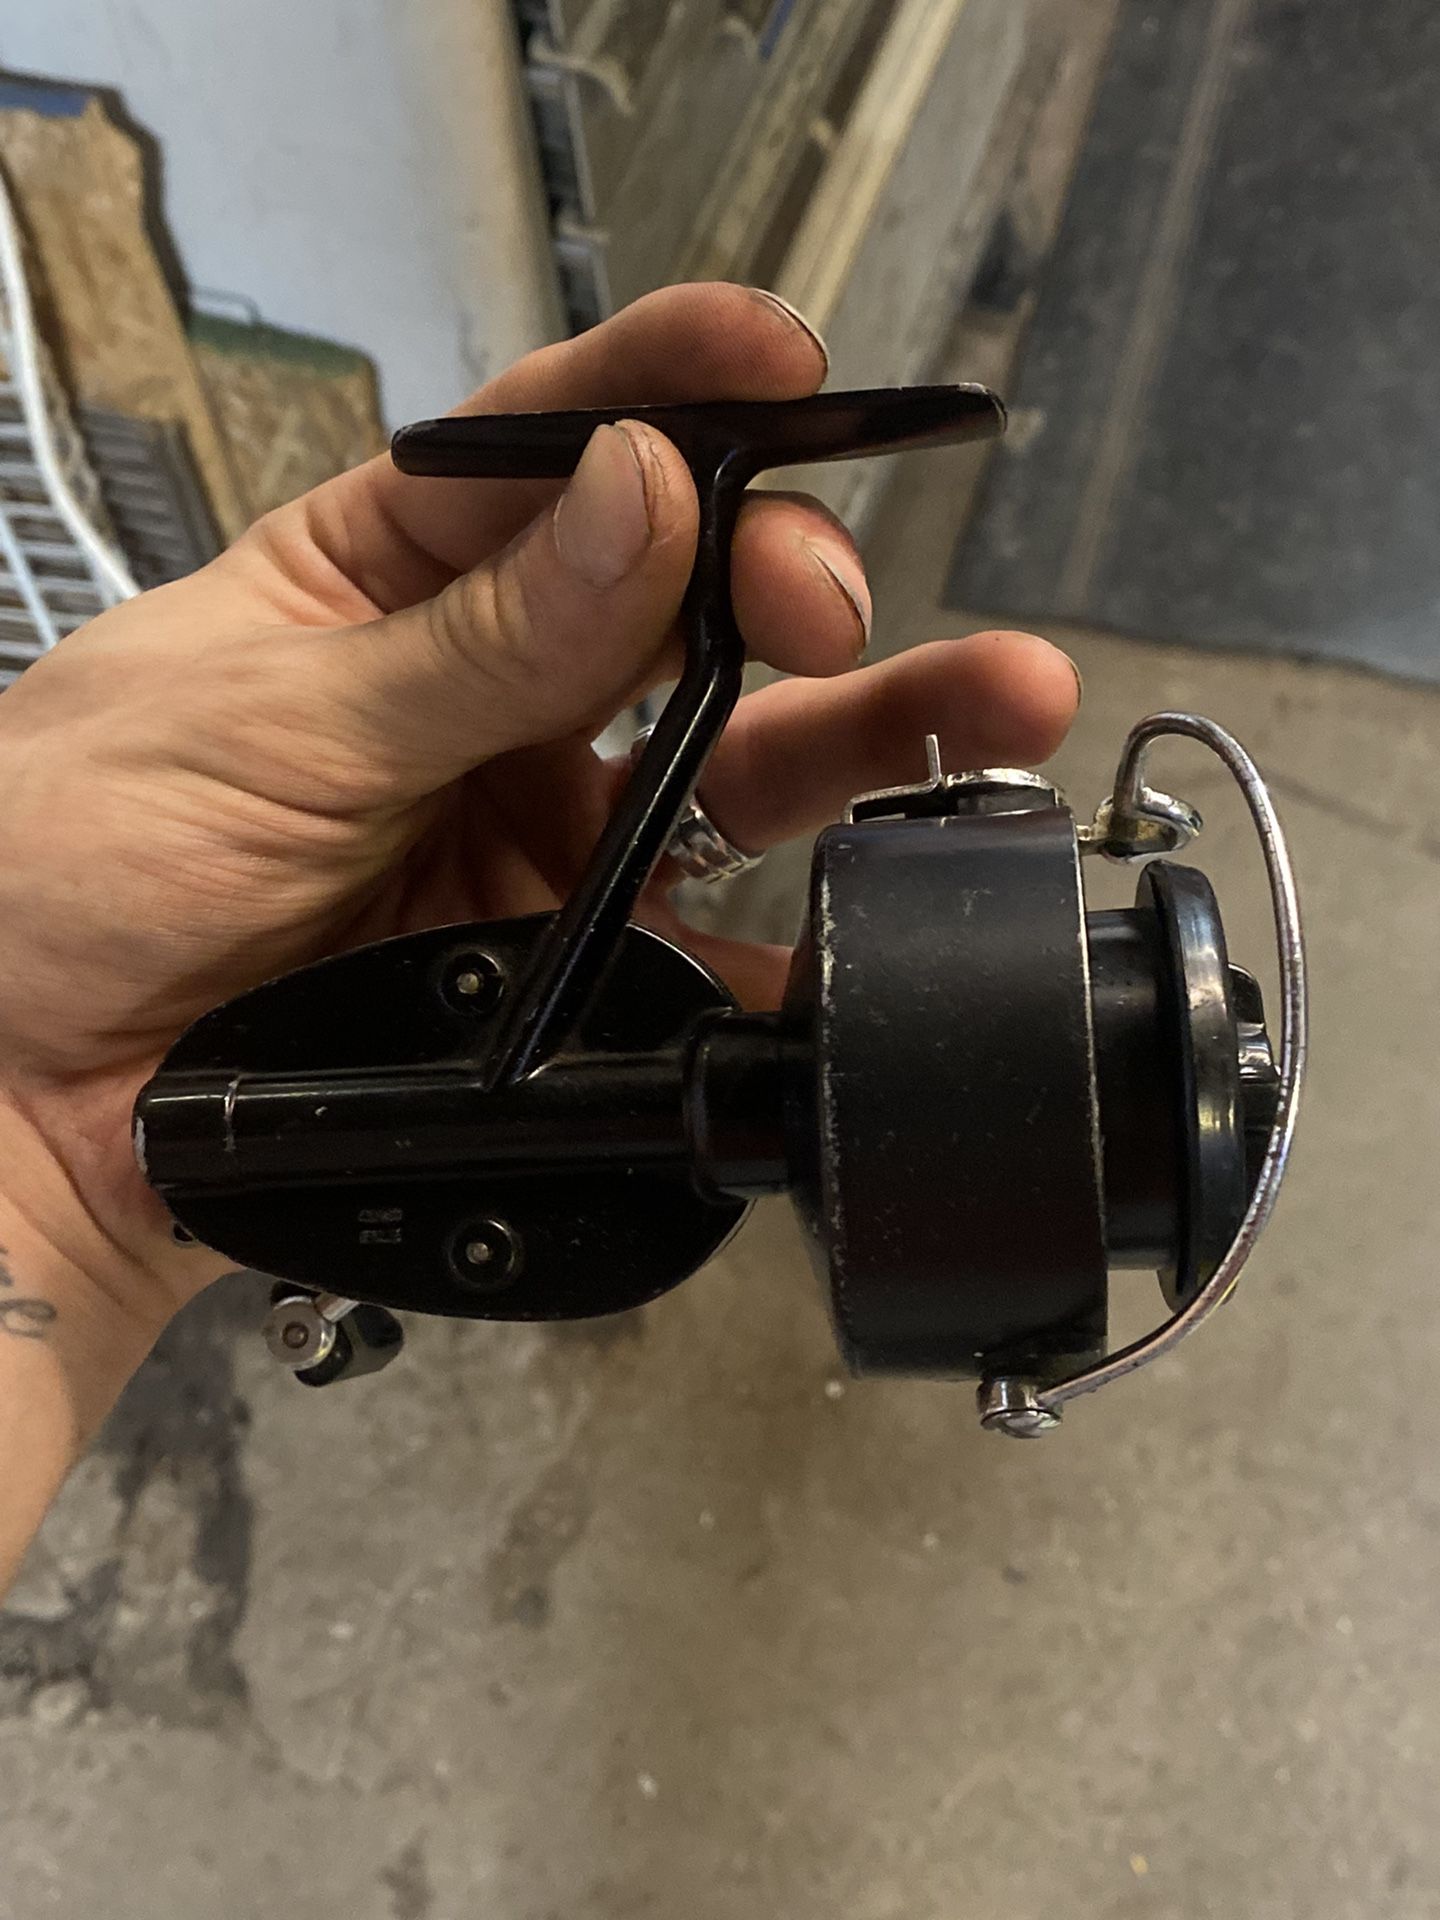 Pre 1957 hardy Garcia Mitchell 300 Reel for Sale in Worthington, WV -  OfferUp